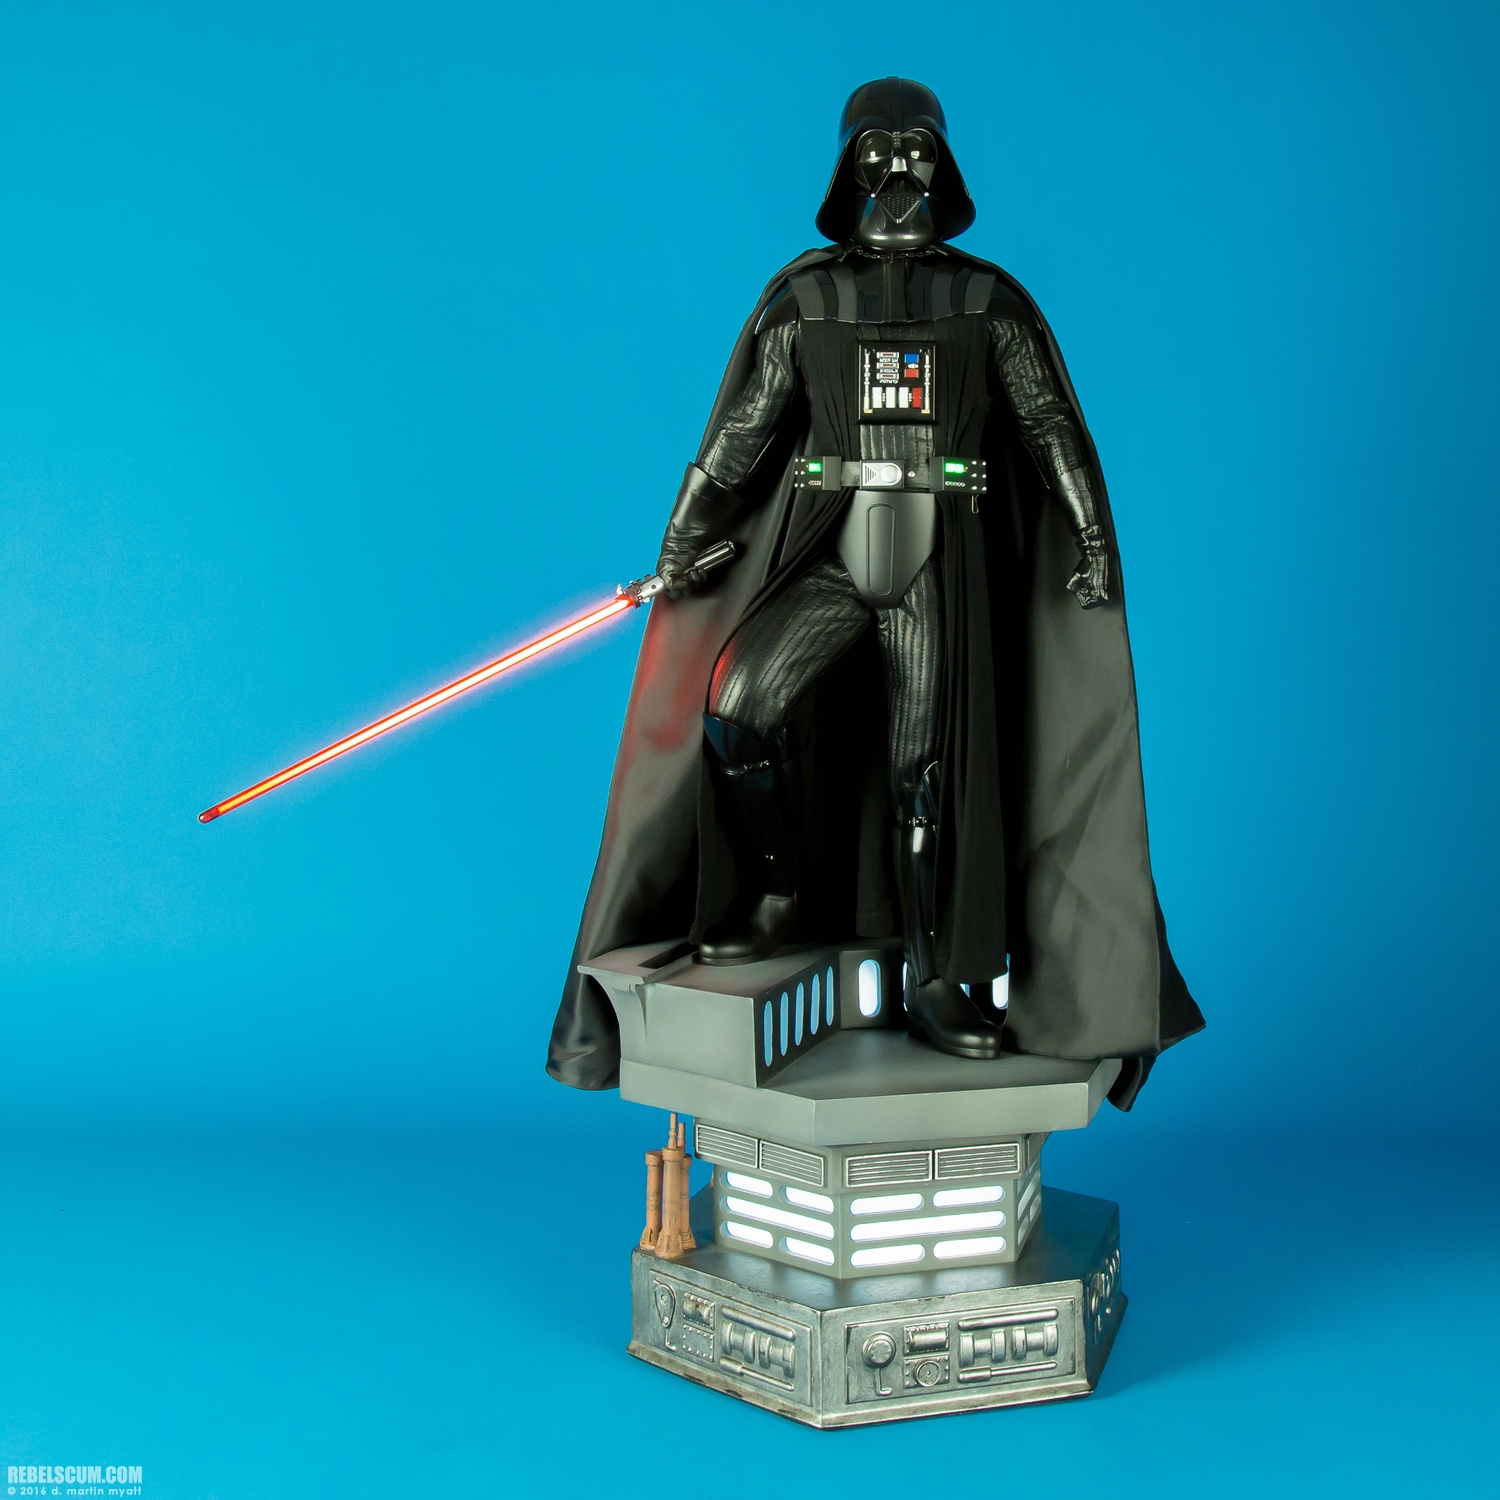 Darth-Vader-Lord-of-the-Sith-Premium-Format-Figure-Sideshow-017.jpg